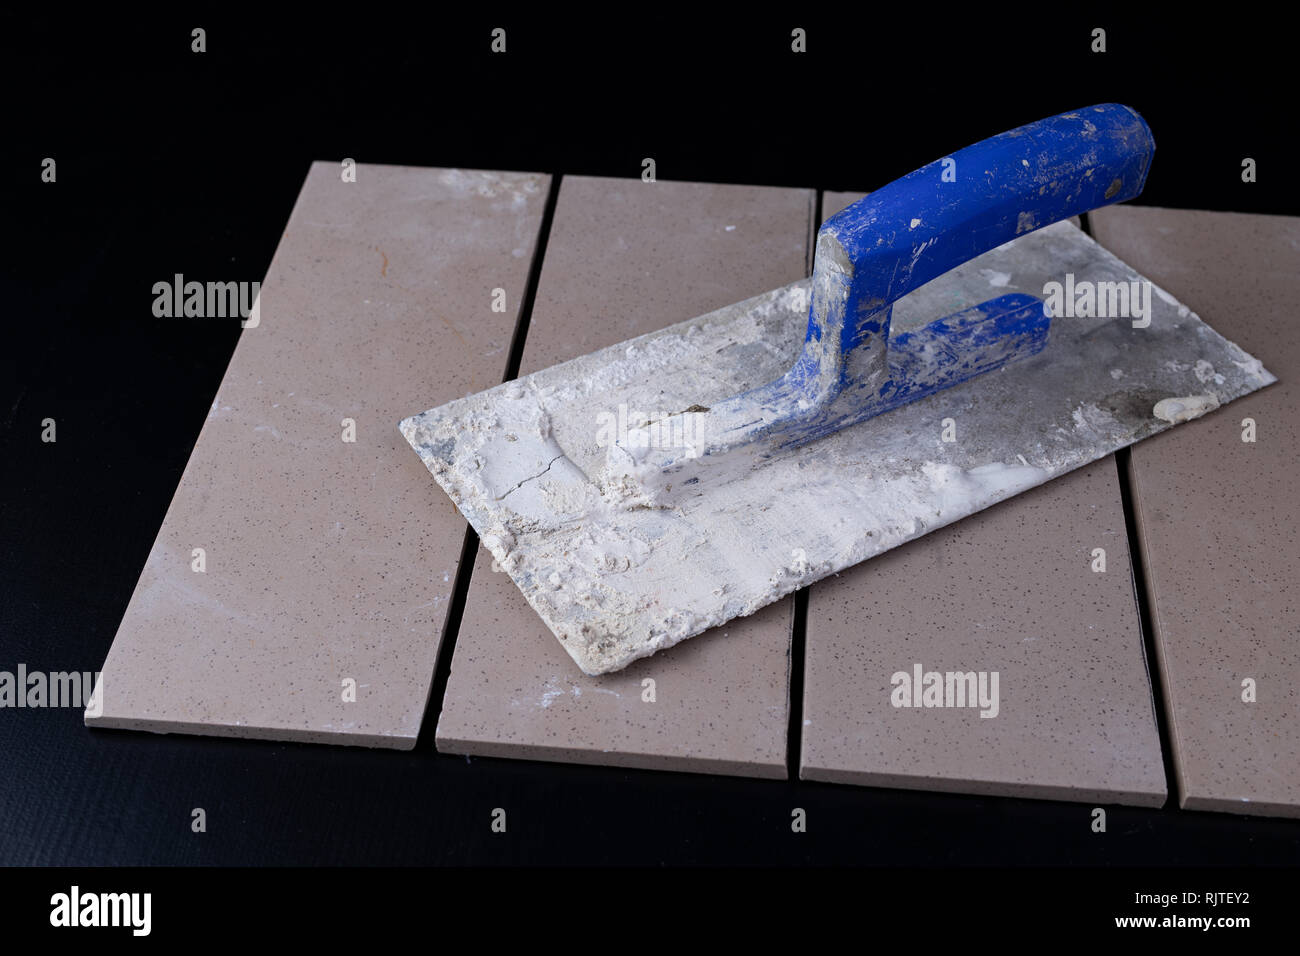 Tiles cut to size and trowels for applying mortar. Masonry accessories on a workshop table. Dark background. Stock Photo